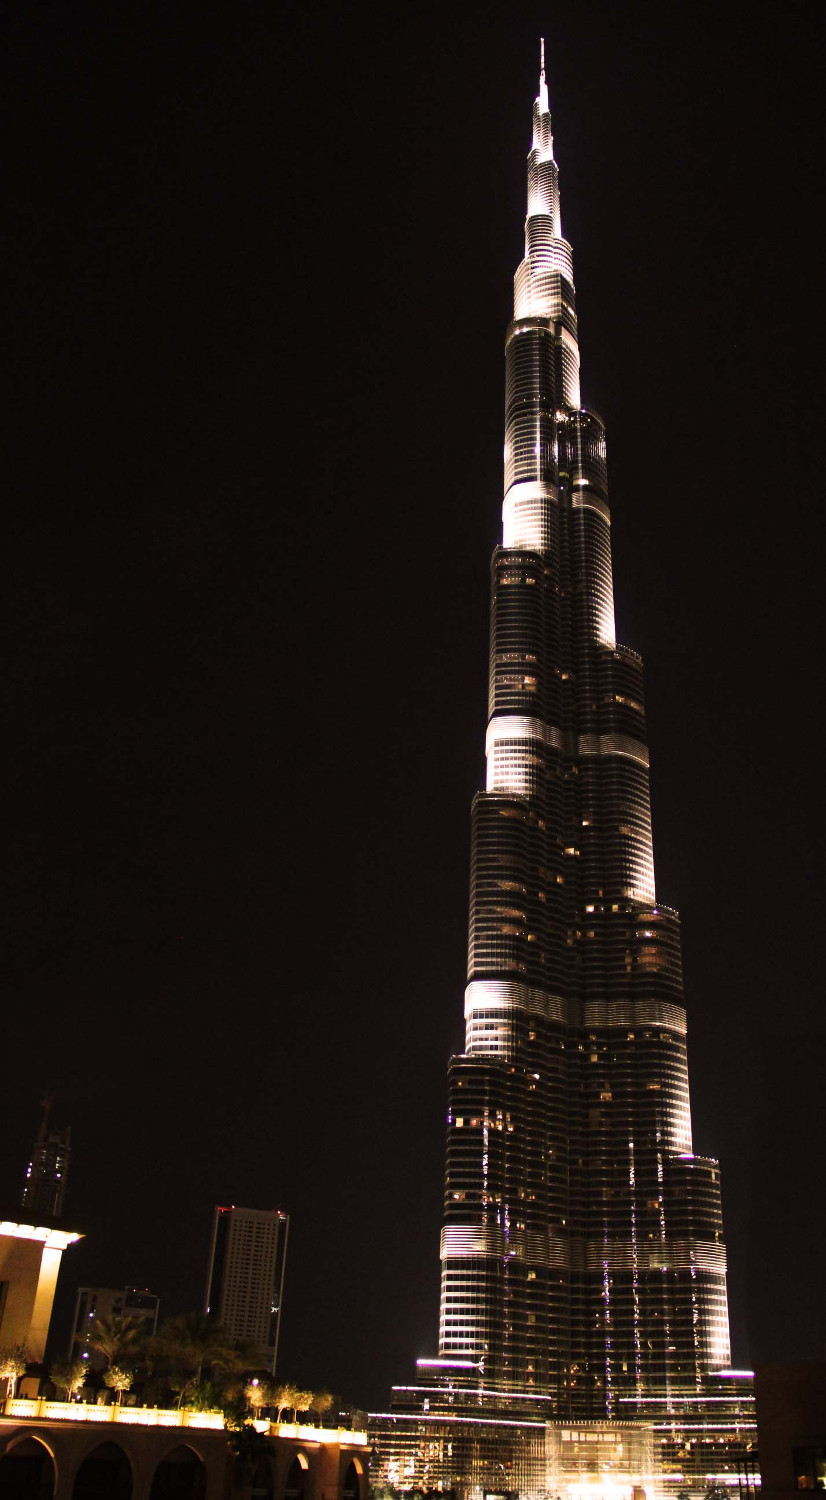 Burj Khalifa is one of the top Dubai tourist attractions. Use this comprehensive guide for Dubai to discover all you need to know before visiting Dubai, the things to do in Dubai, hotels in Dubai, food in Dubai, and more. #dubai #dubaiguide #dubaitravelguide #dubaiattractions #dubaithingstodo #travel #uae #dubaitips